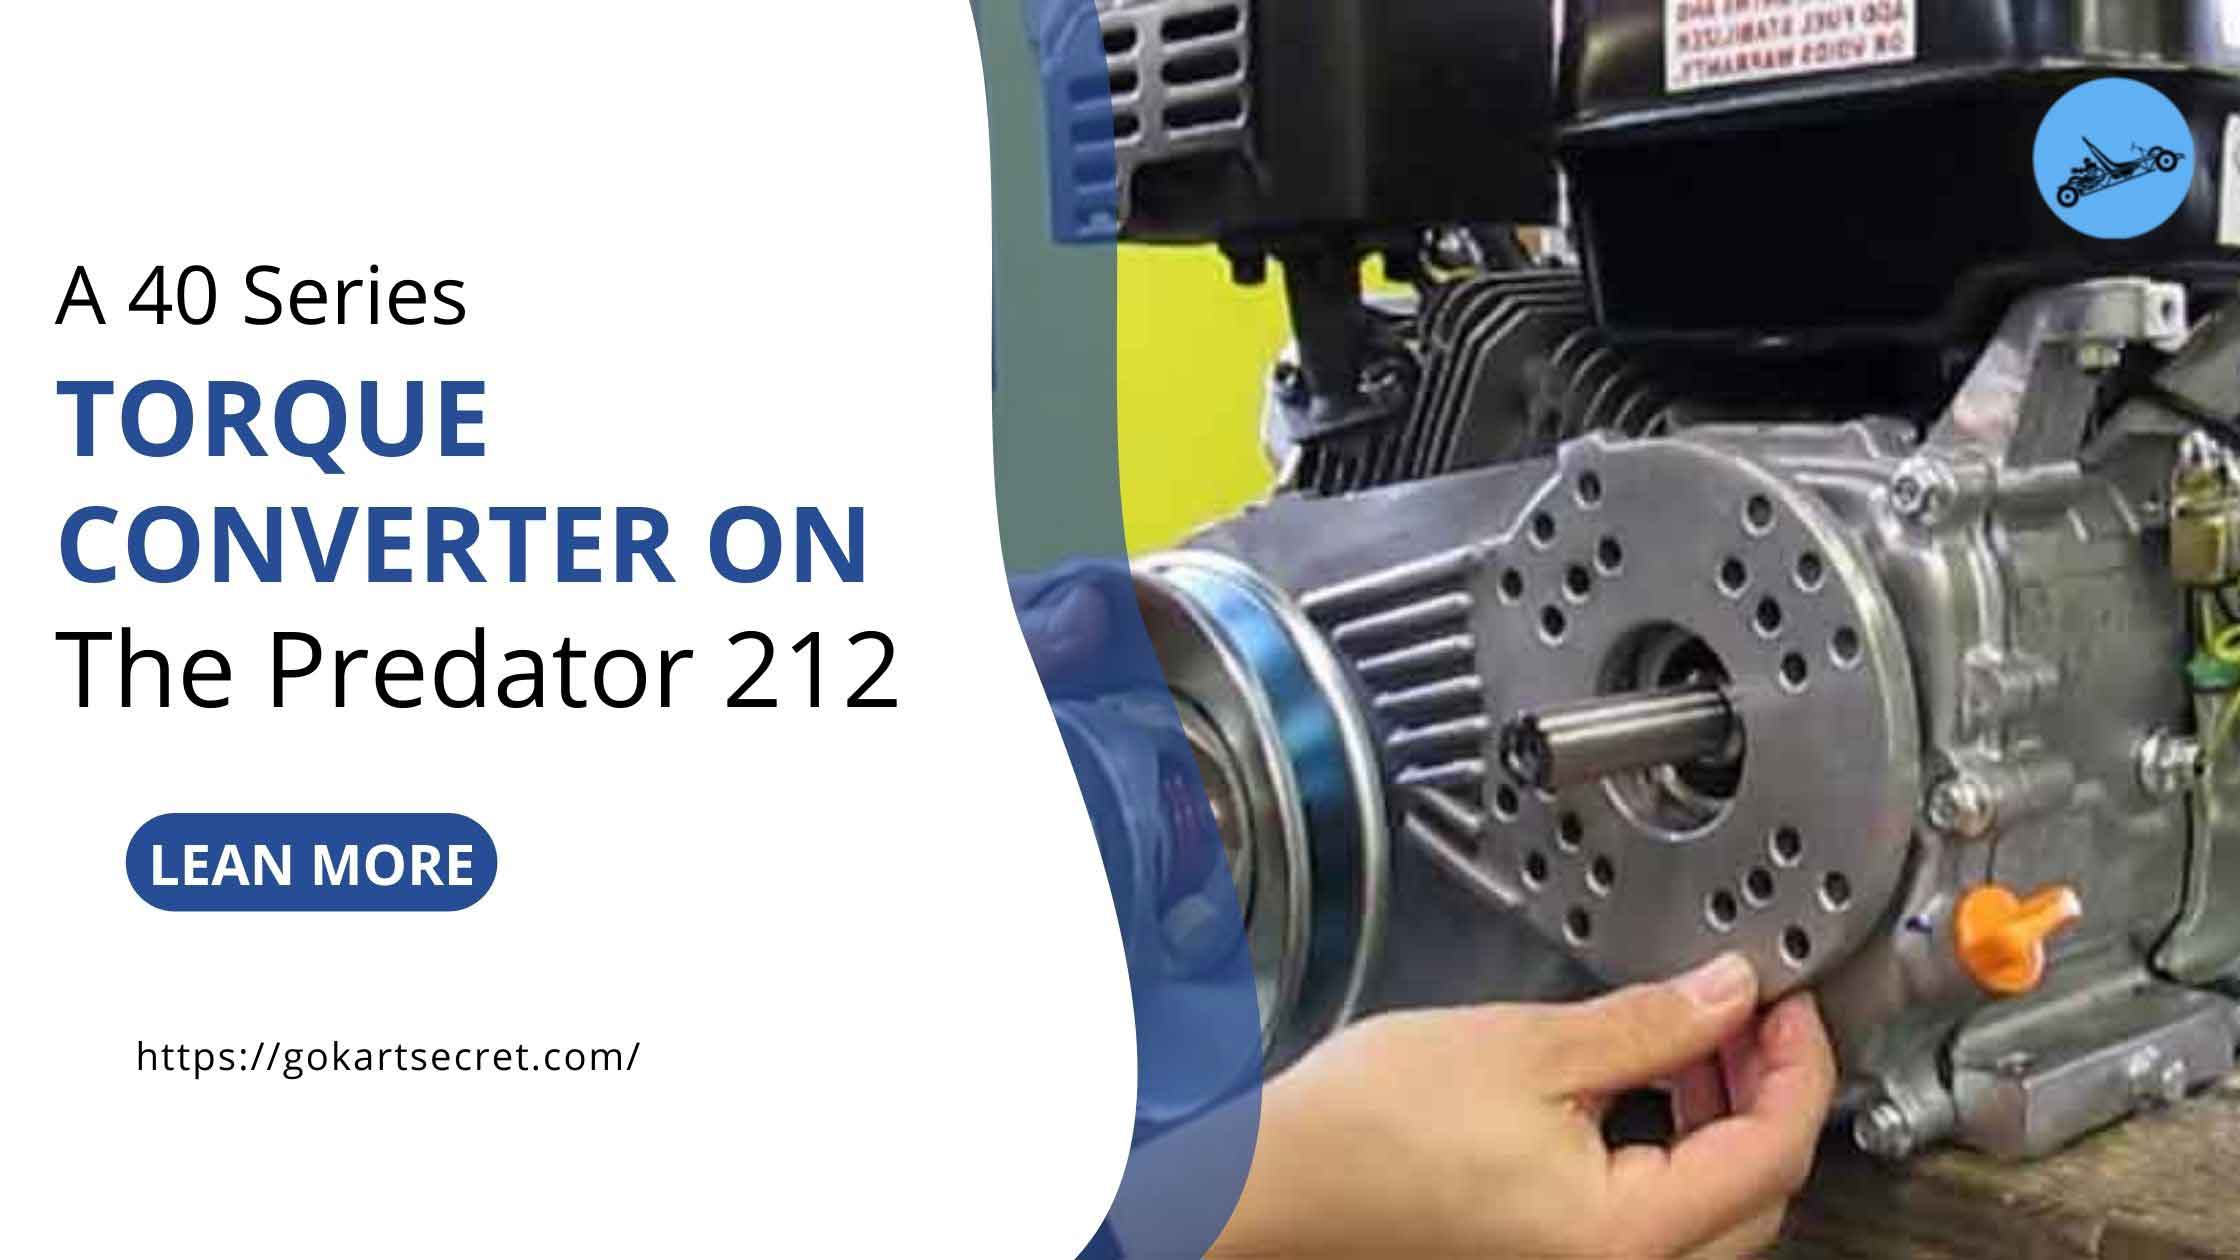 Can You Put A 40 Series Torque Converter On The Predator 212?